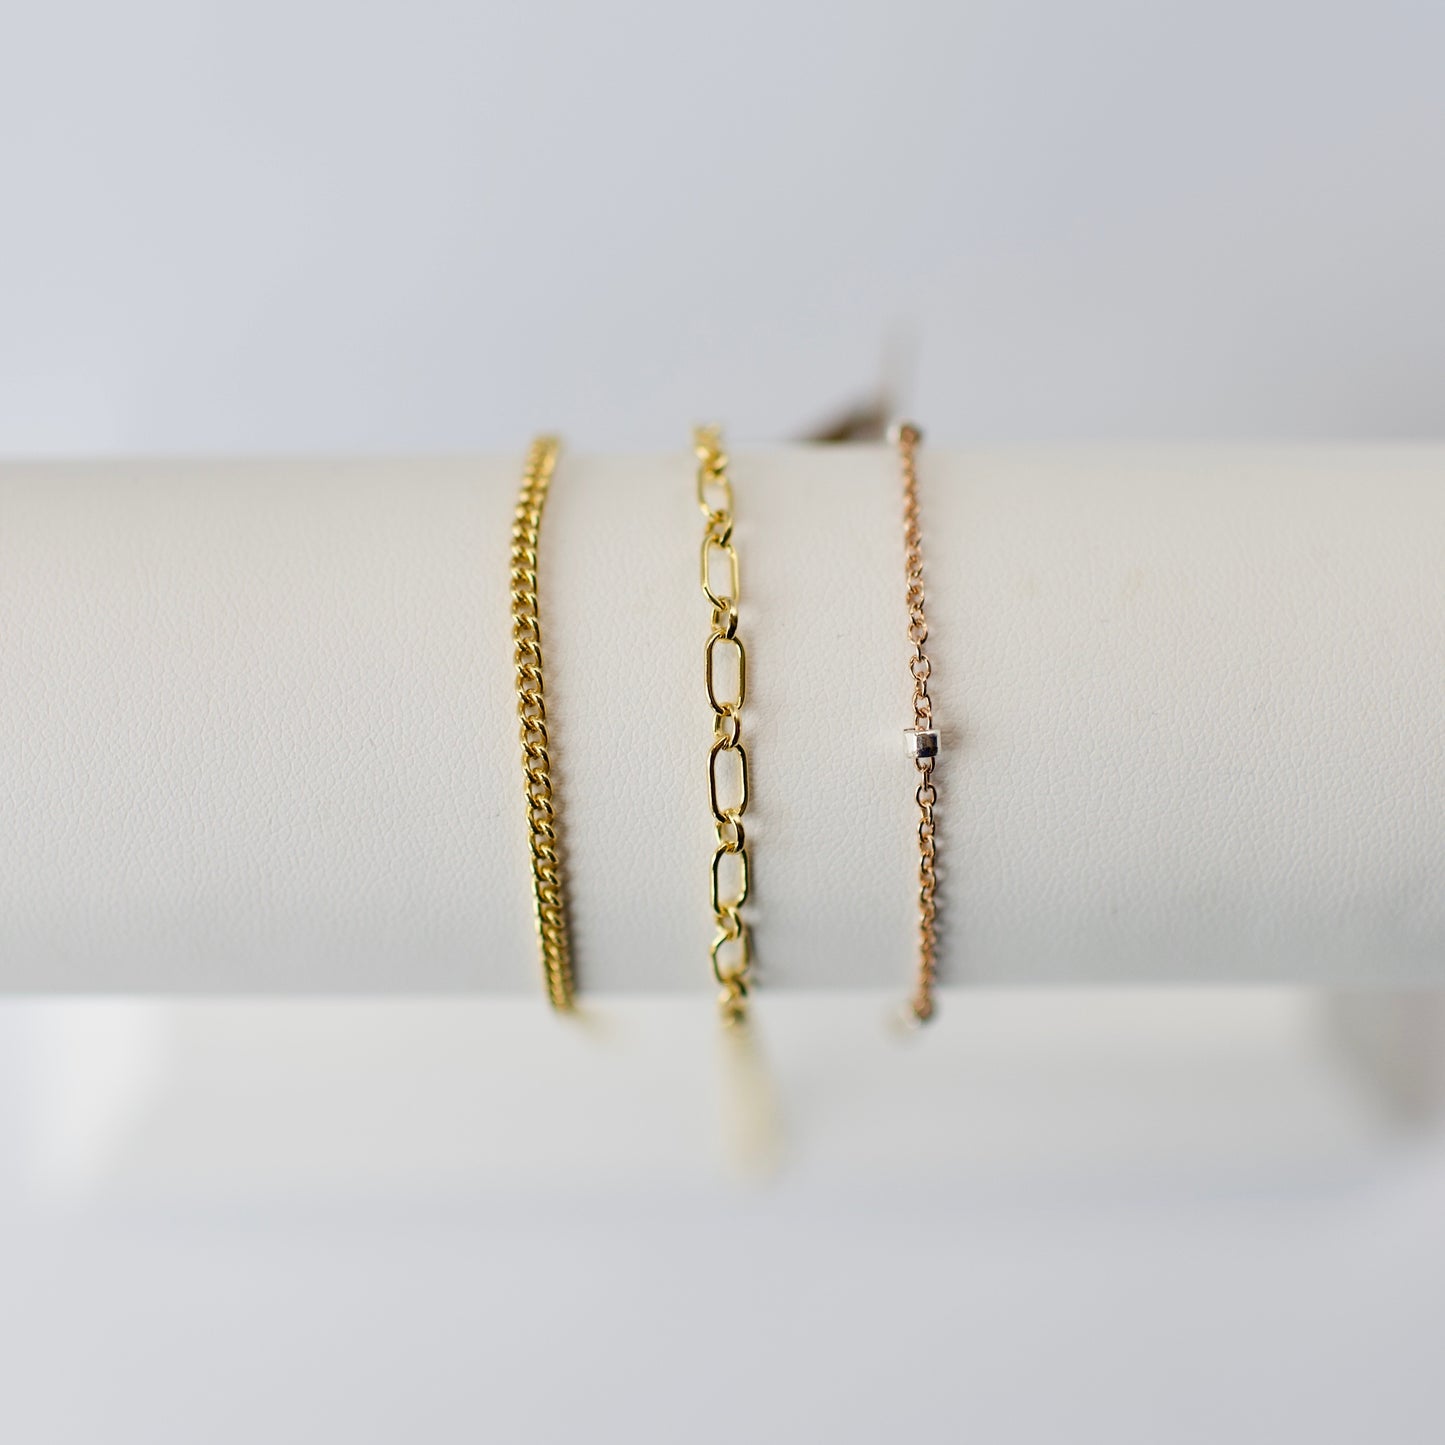 Bracelet- Permanent Jewelry Chain 14k Yellow + Rose Gold Fill, and Sterling Silver